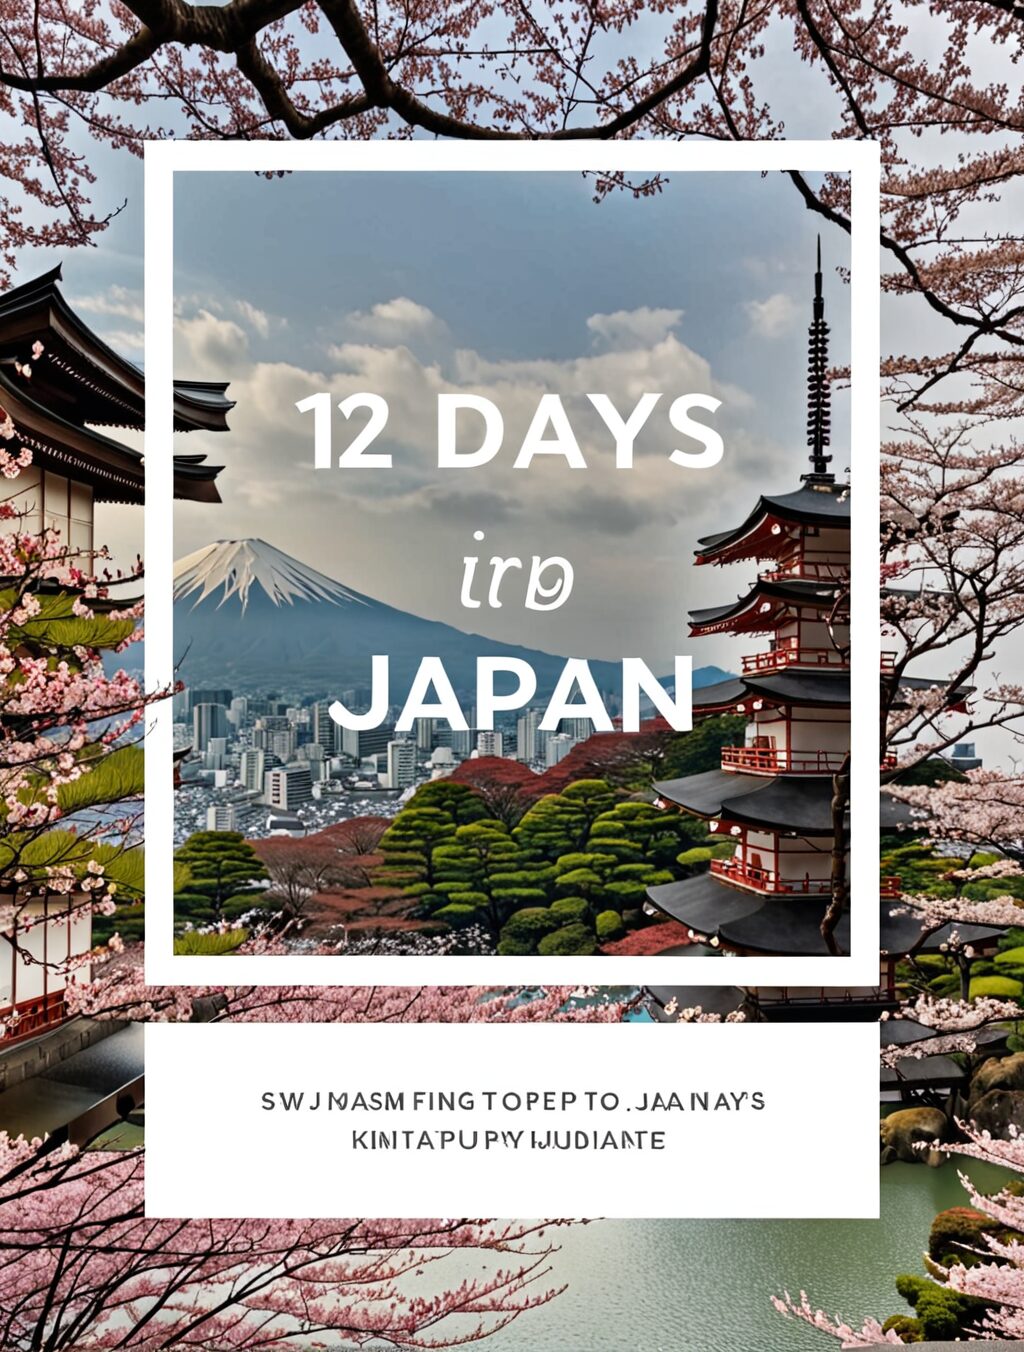 12 day trip to japan itinerary